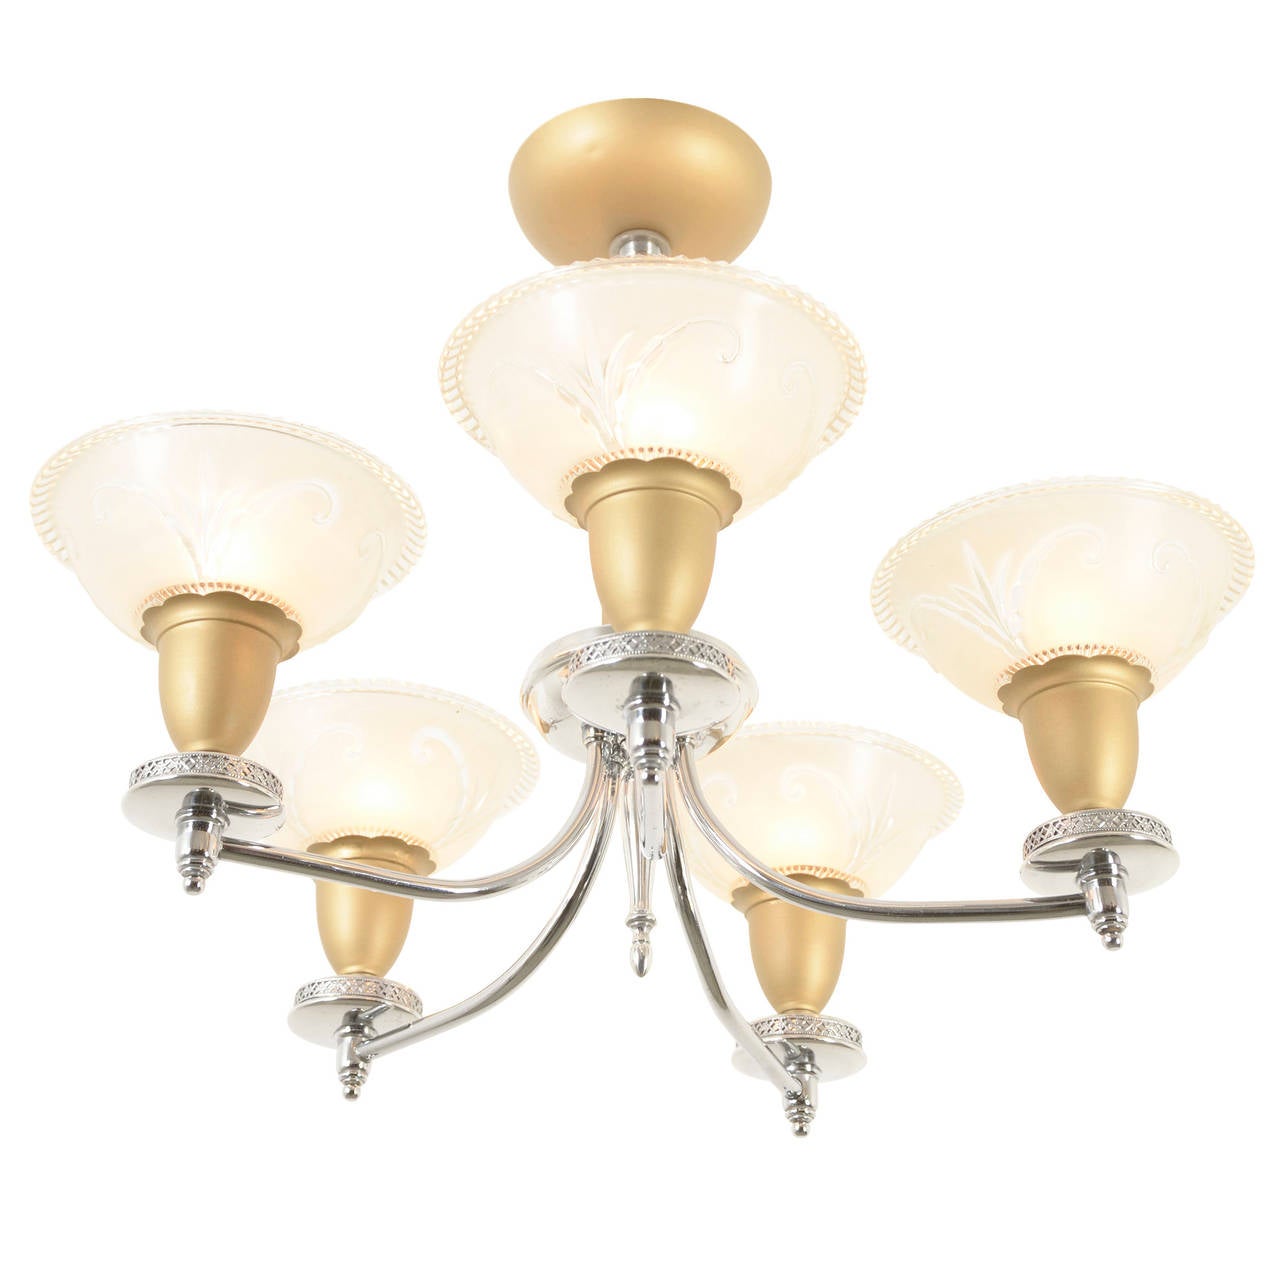 With its forward-looking mix of Moderne and Colonial elements, this dual-toned 5-light chandelier makes a statement that is both modern and traditional at the same time. Warm, decorated, pressed glass shades and intricate chrome filigree complete